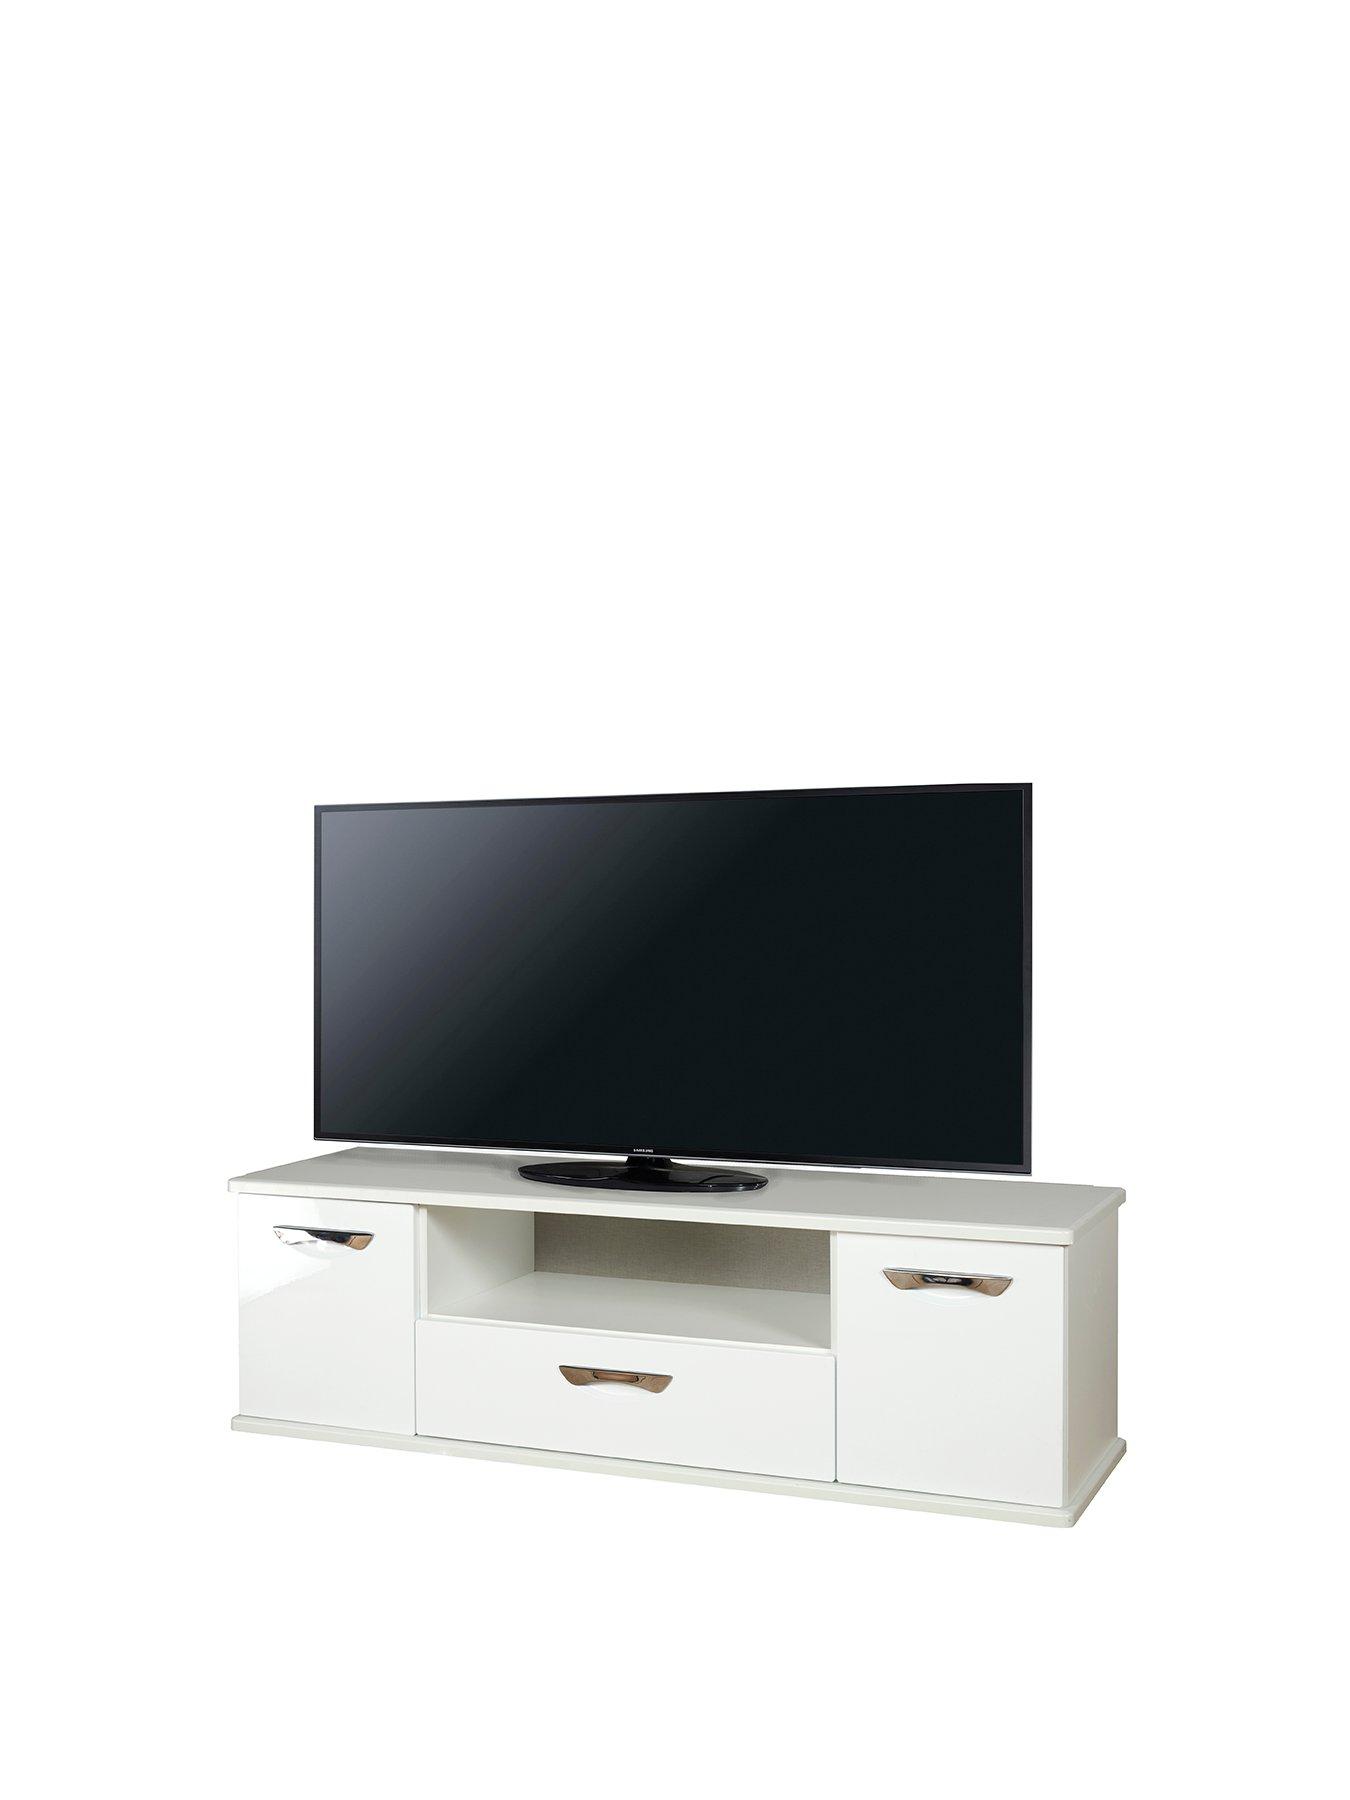 Swift Neptune Ready Assembled White High Gloss Tv Unit - Fits Up To 65 Inch Tv - Fsc Certified